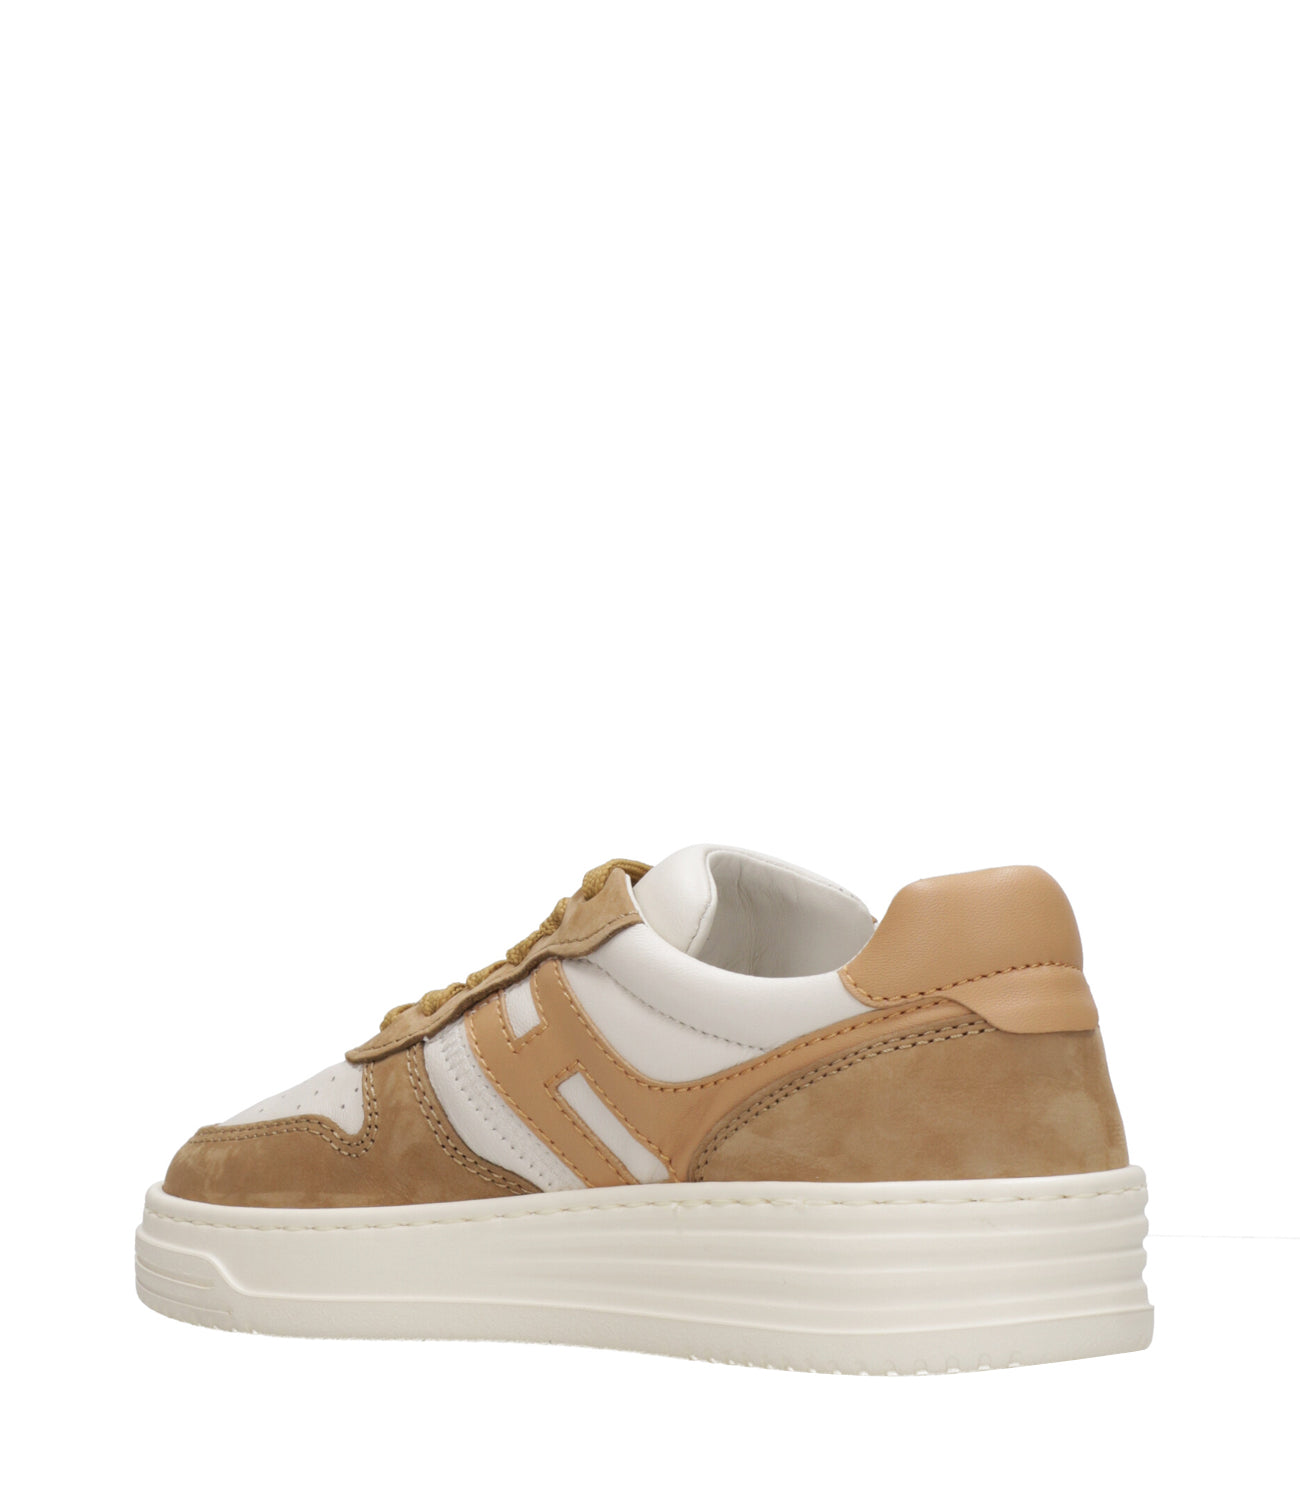 Hogan | Sneakes H630 Lace-up Ivory and Brown